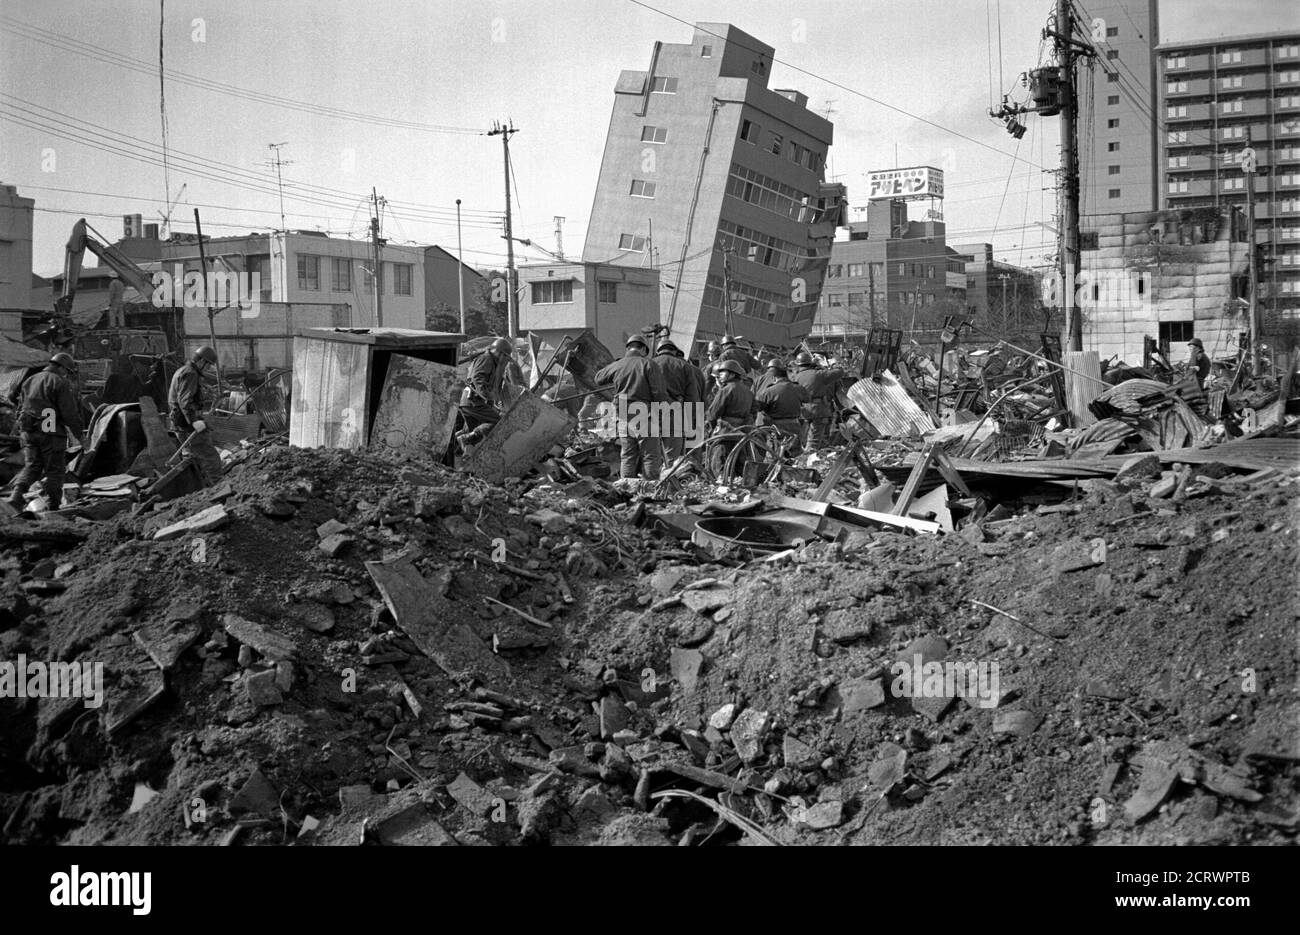 Japan Self Defense Force (JSDF) group gathered in the wreckage and ruins for relief aid in the aftermath of the damage caused by the 1995 Great Hanshin Earthquake in Kobe, Japan Stock Photo